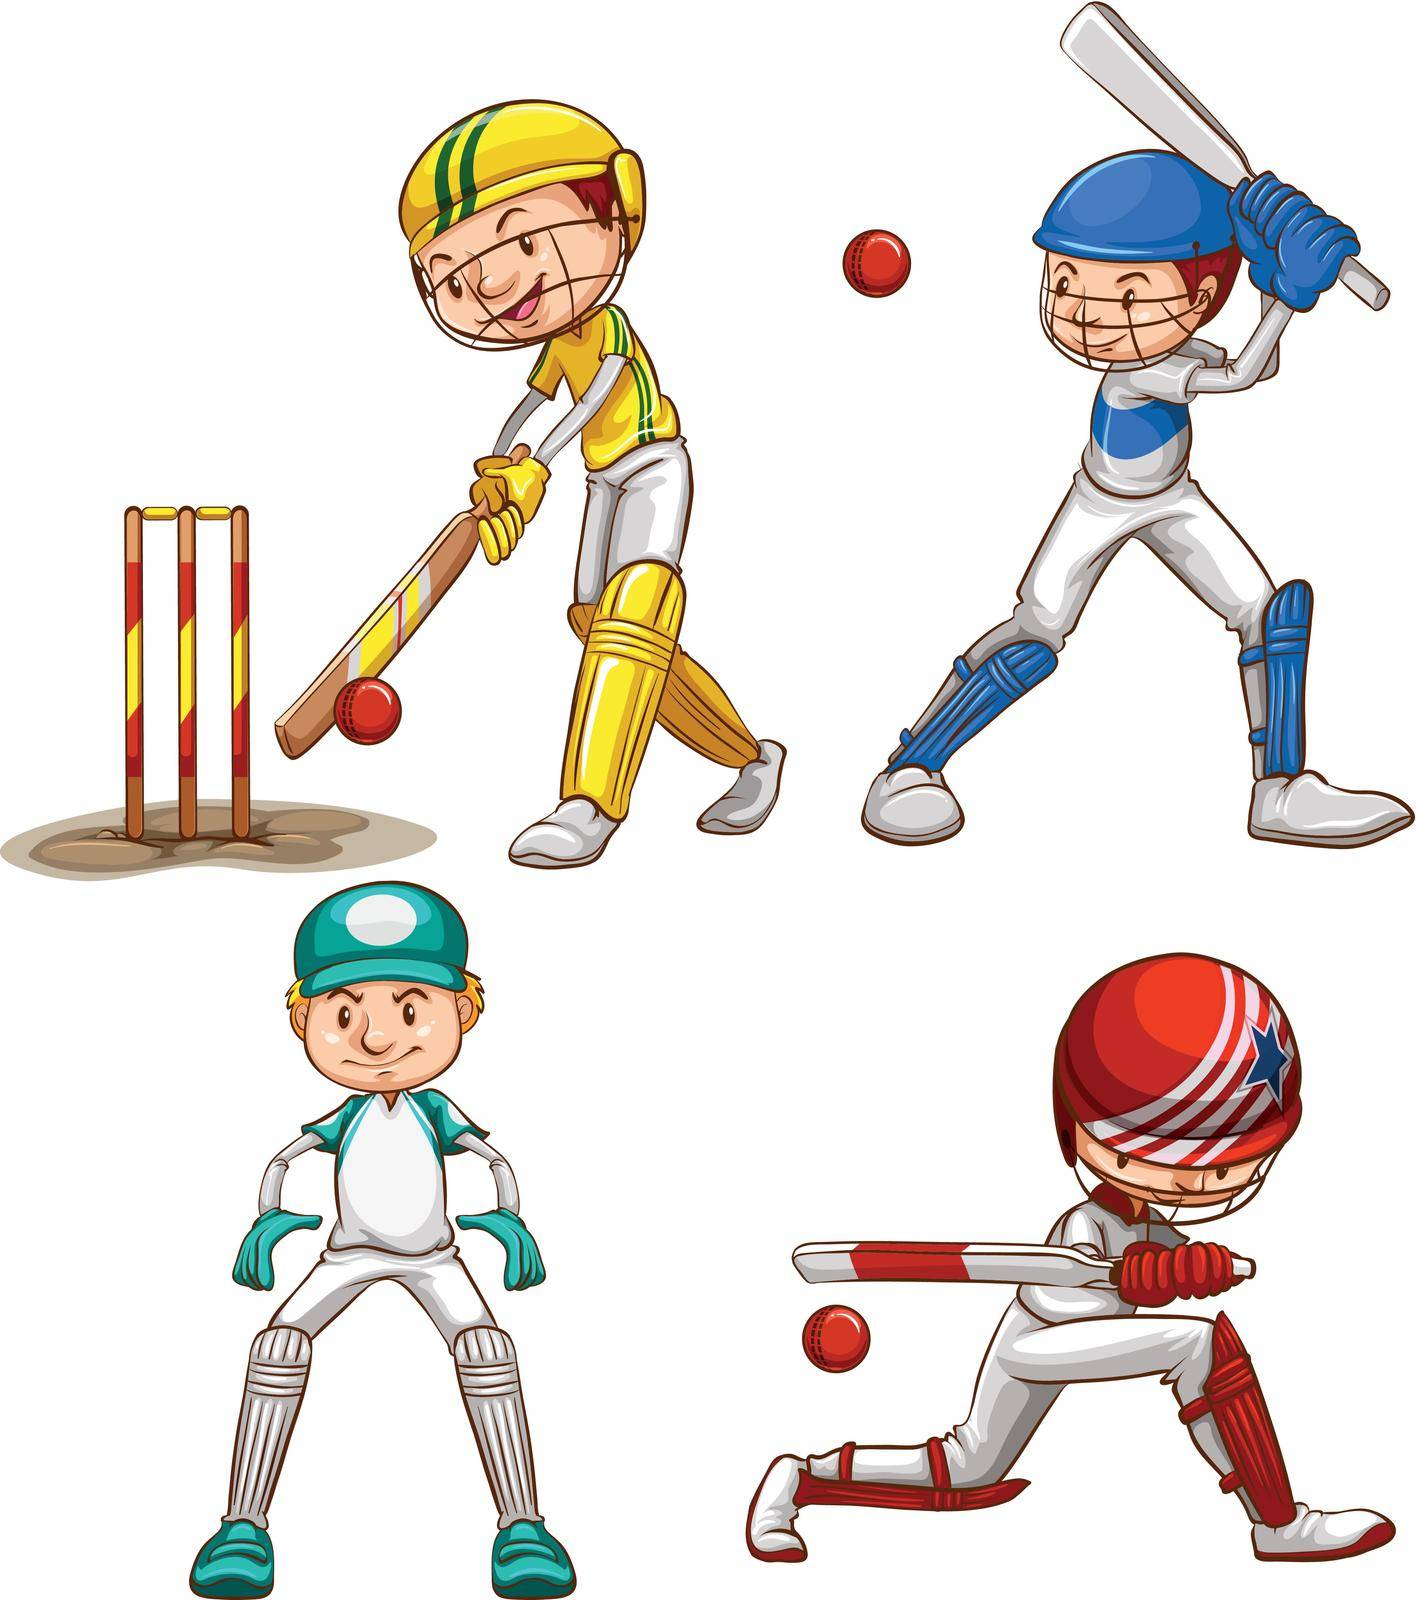 Illustration of the simple sketches of men playing cricket on a white background